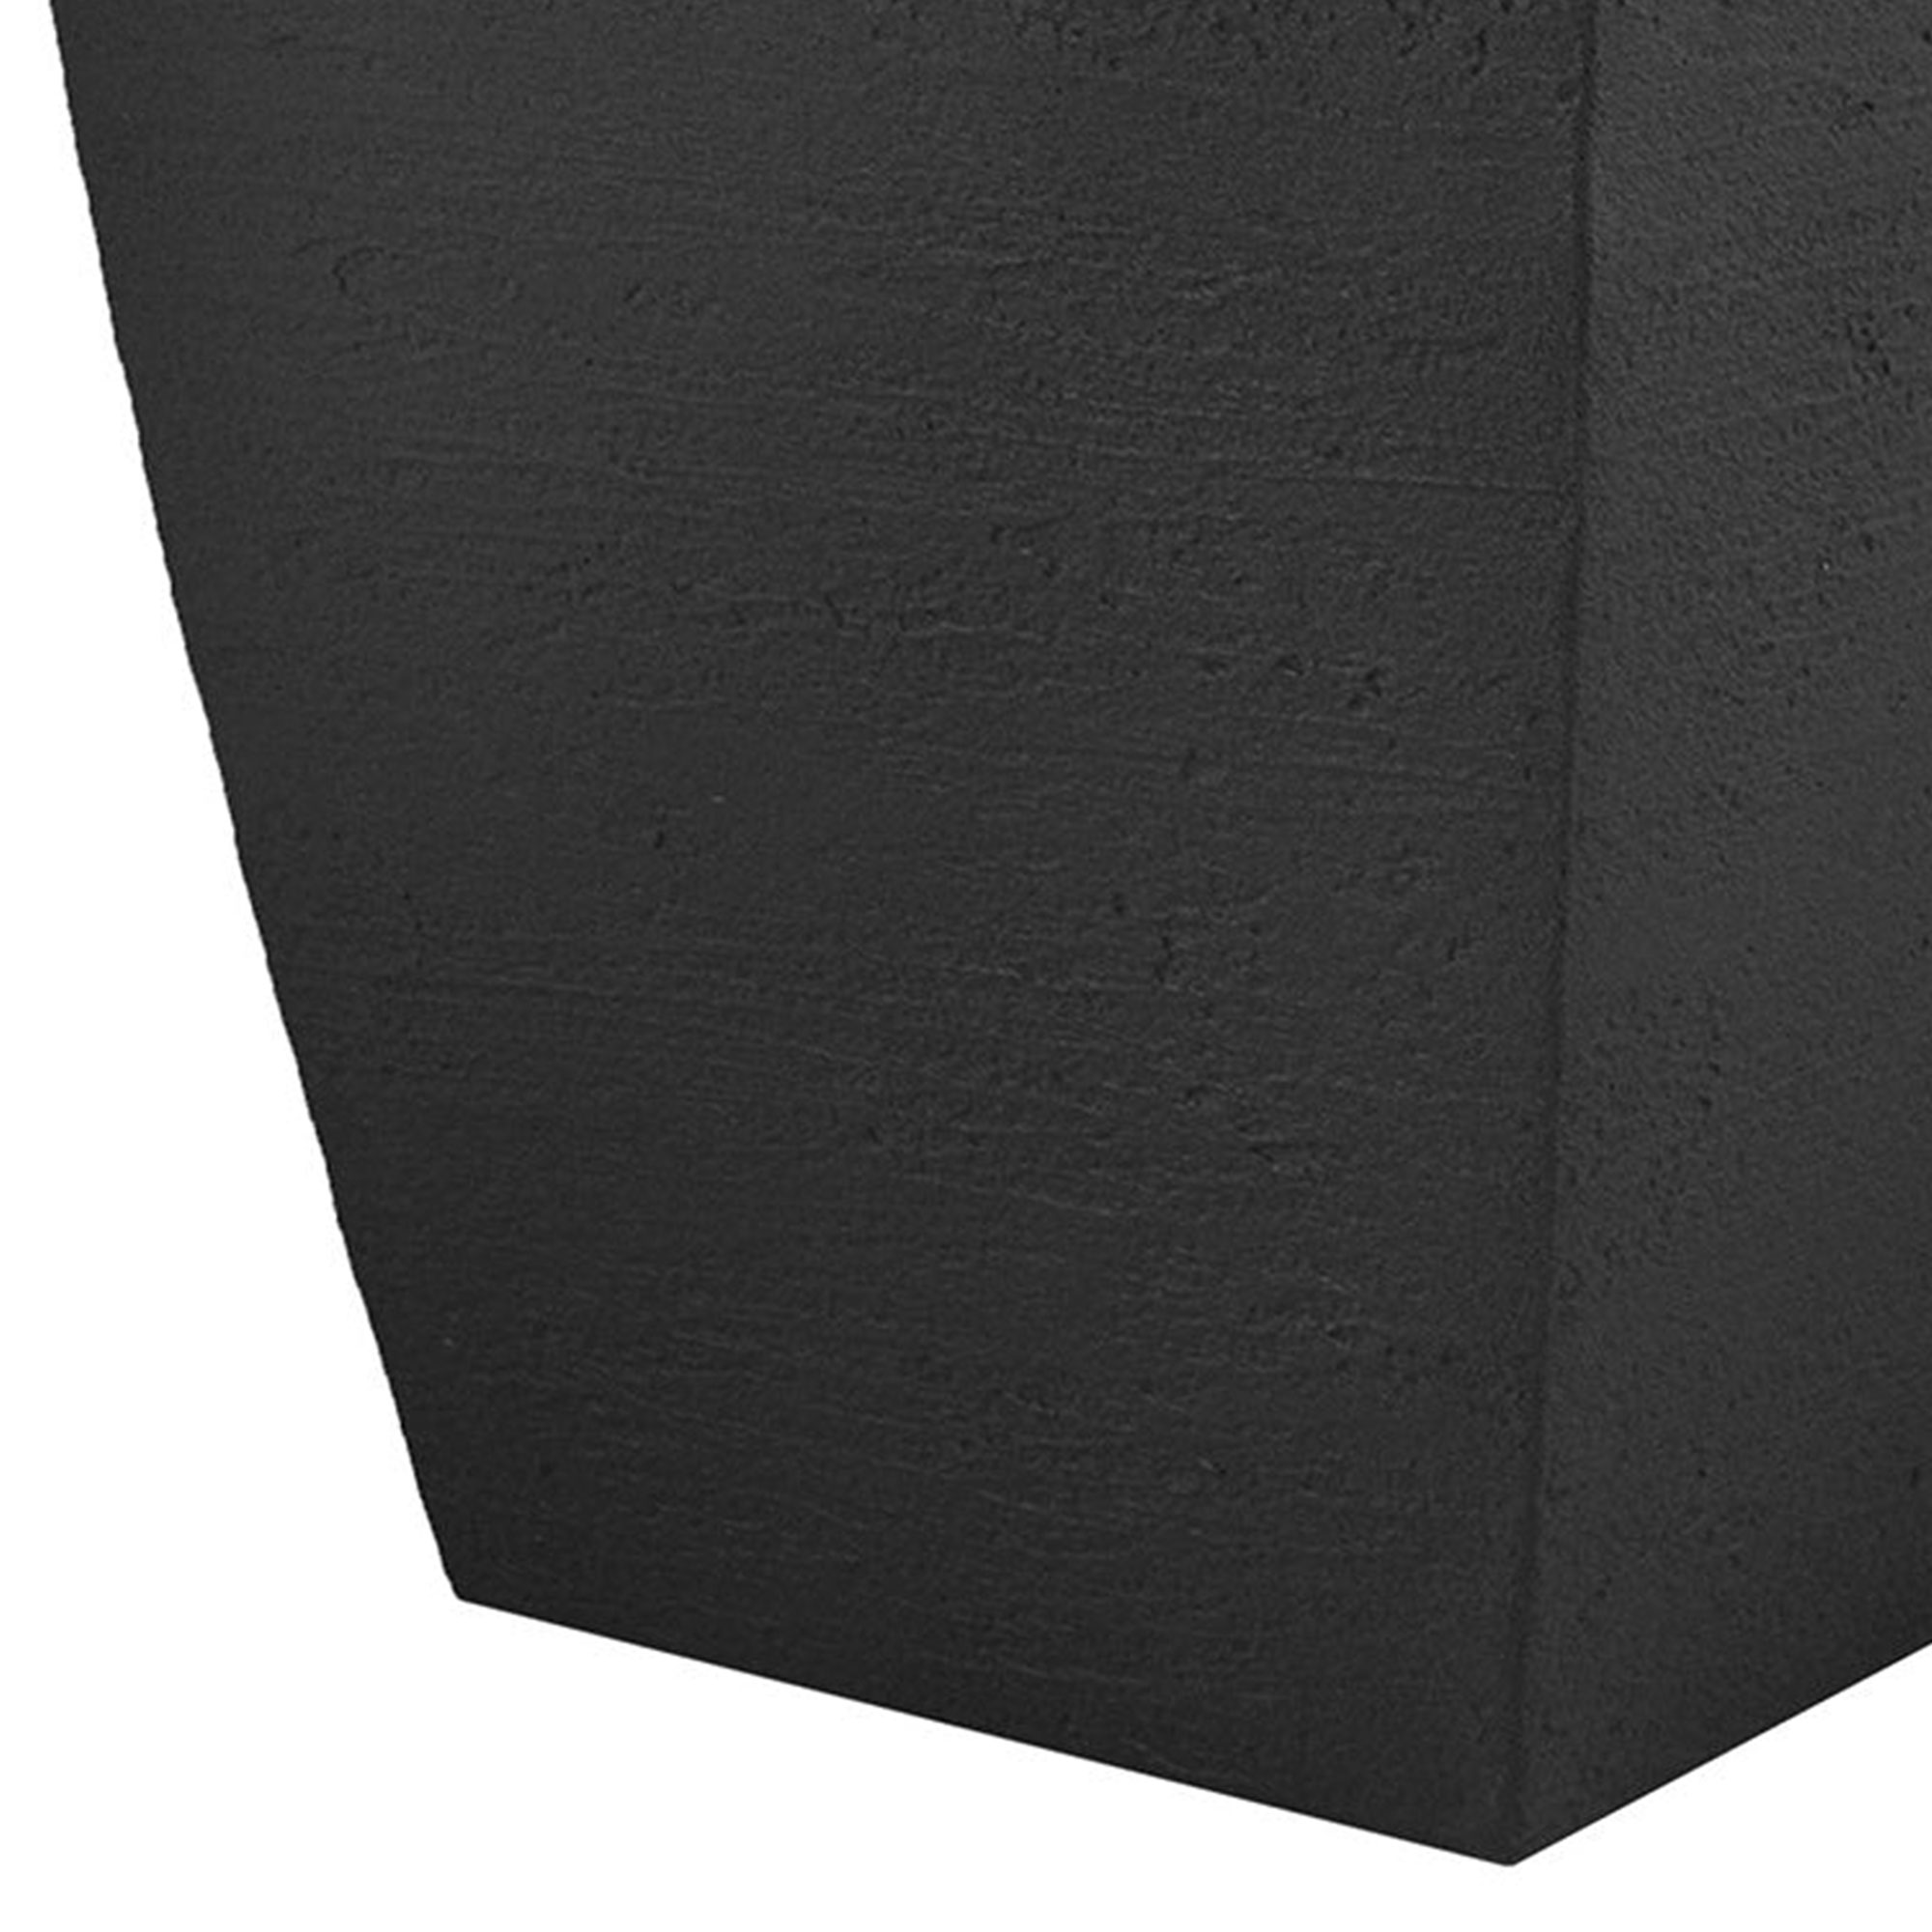 Tusco Products Modern 19 Inch Molded Plastic Square Planter, Black - image 5 of 5